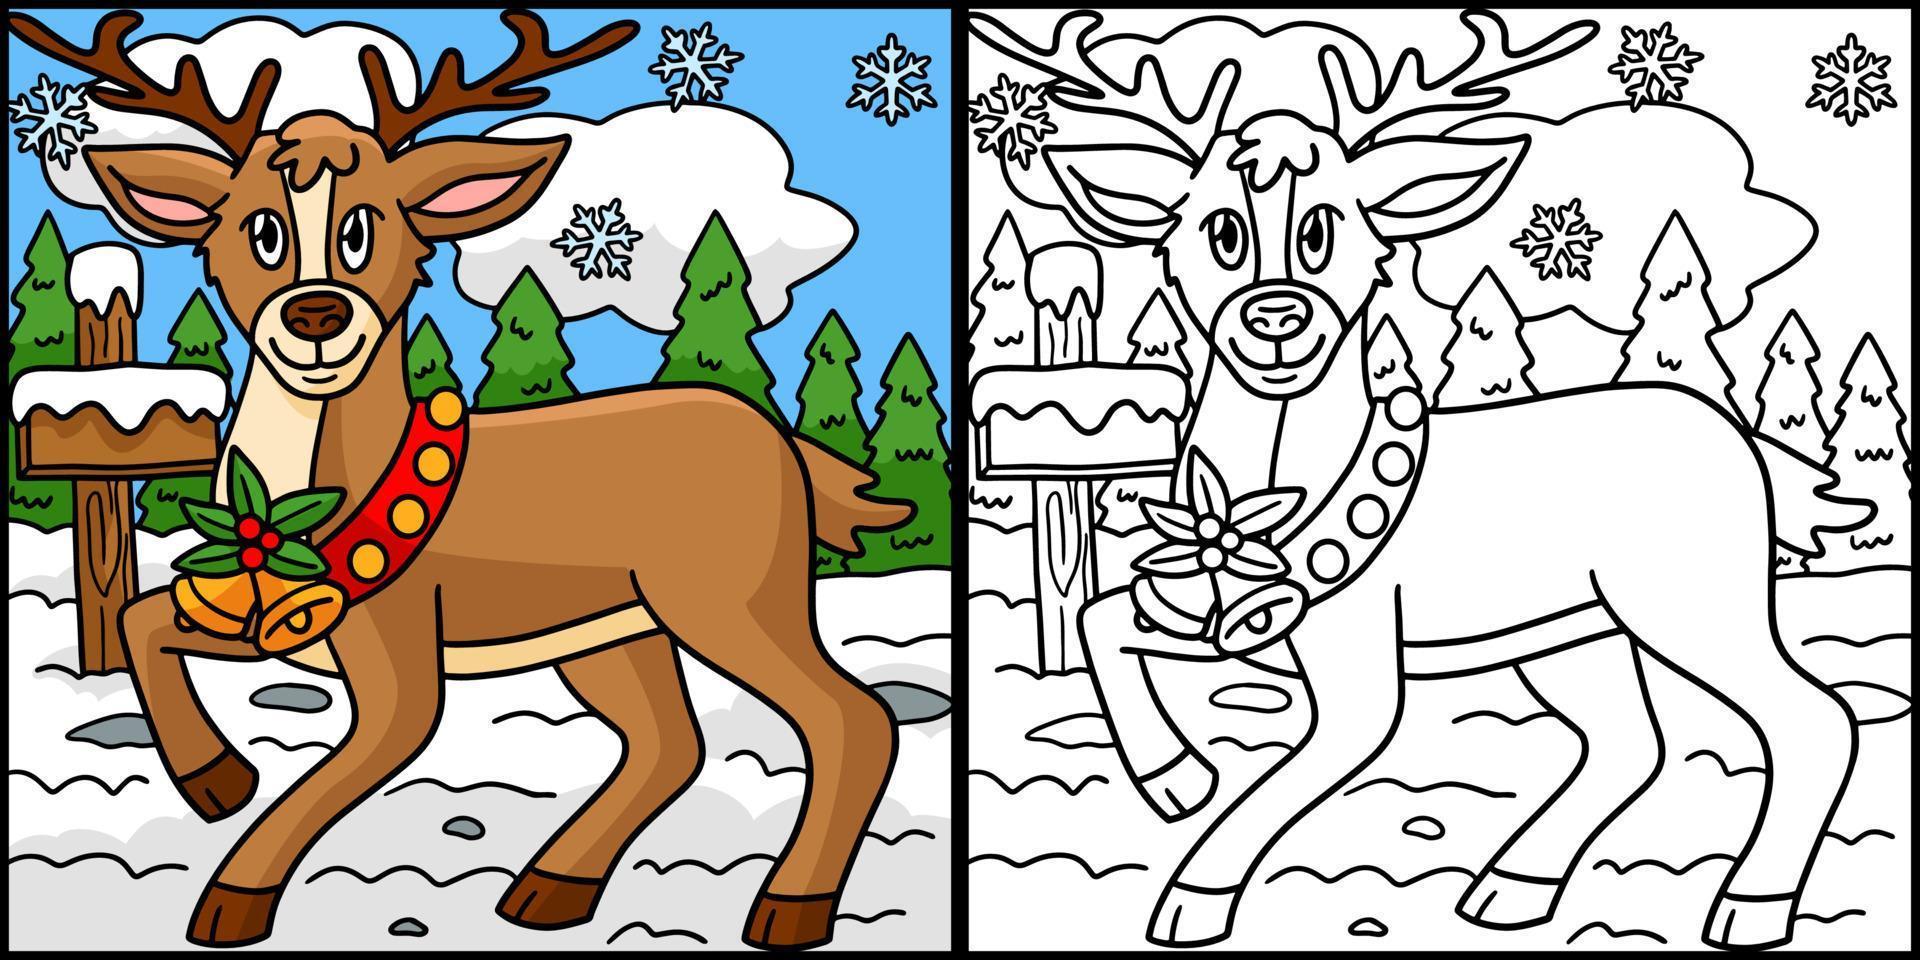 Christmas Reindeer Coloring Page Illustration vector